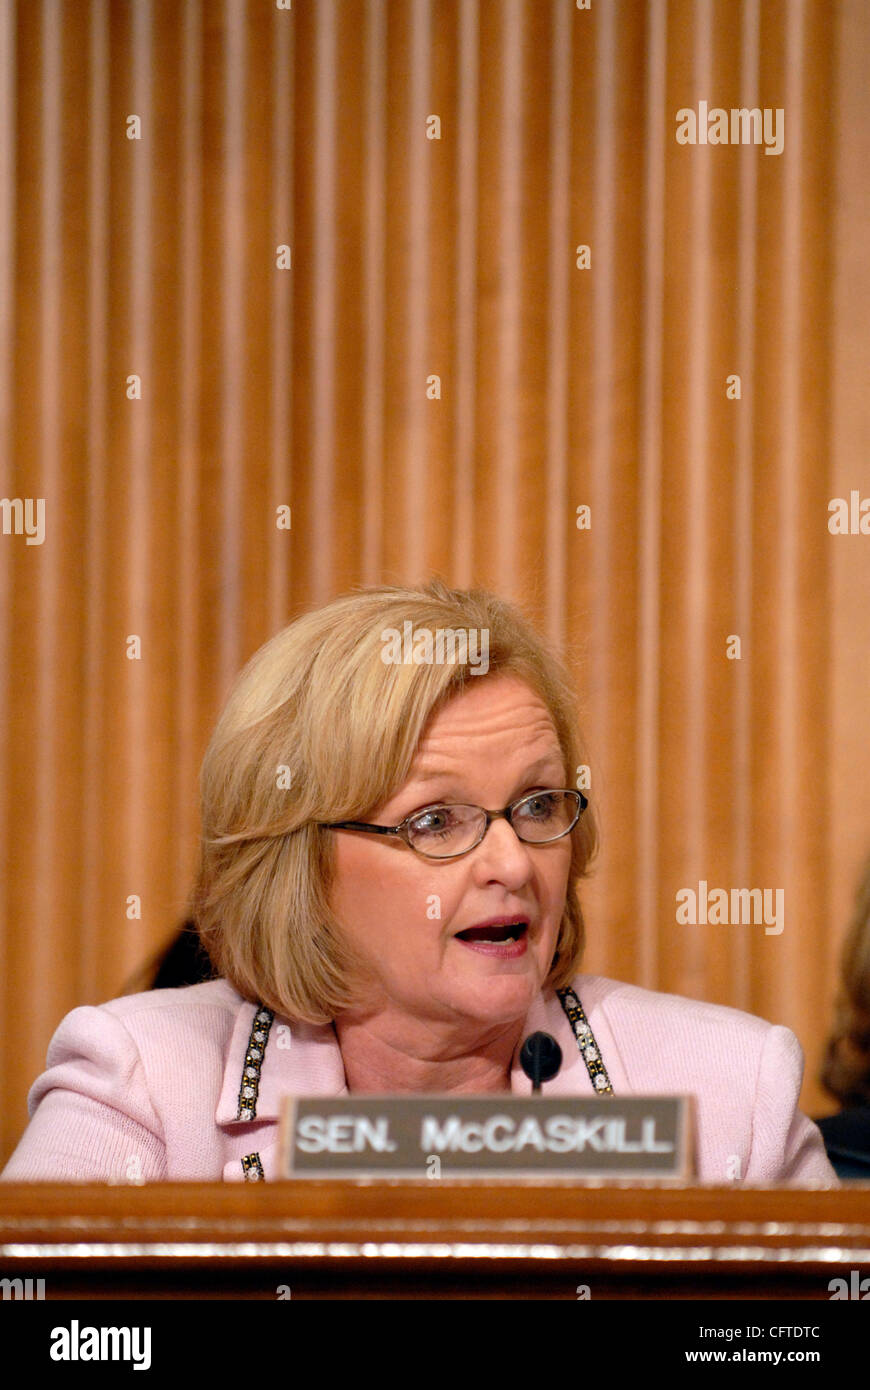 Jan 09, 2007 - Washington, DC, USA - Senator CLAIRE MCCASKILL (D-MO) questions a panel before the Senate Committee on Homeland Security and Government Affairs hearing on implementing recommendations made by the 9/11 Commission. Stock Photo